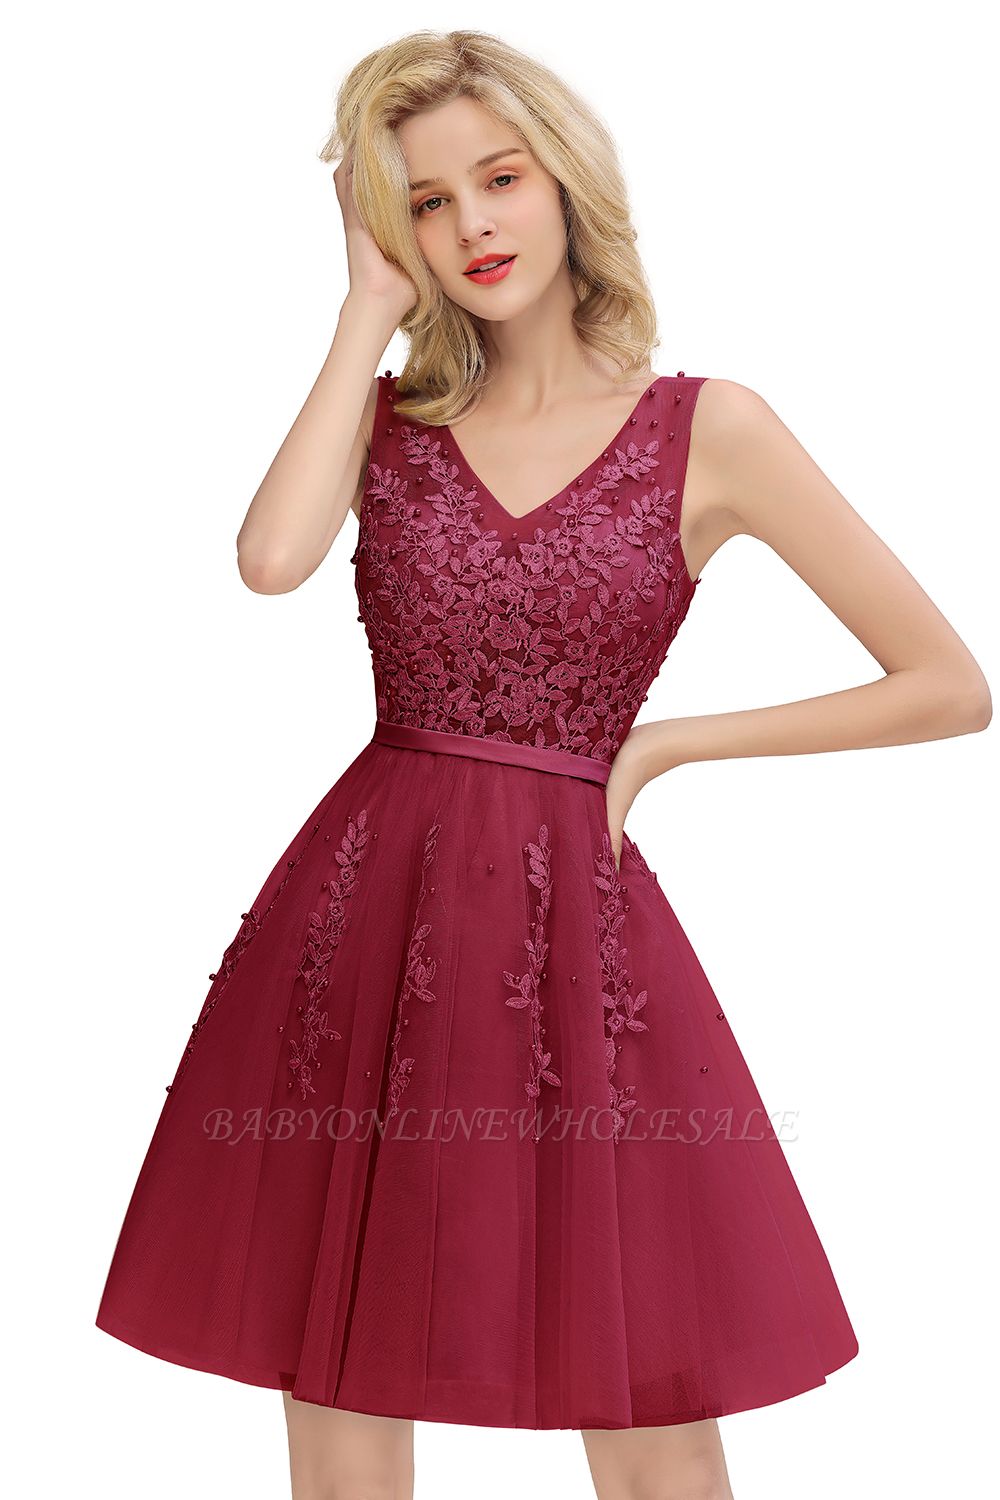 Sexy V-neck Lace-up Short Homecoming Dresses with Lace Appliques | Burgundy, Navy, Dusty pink Back to school Dress